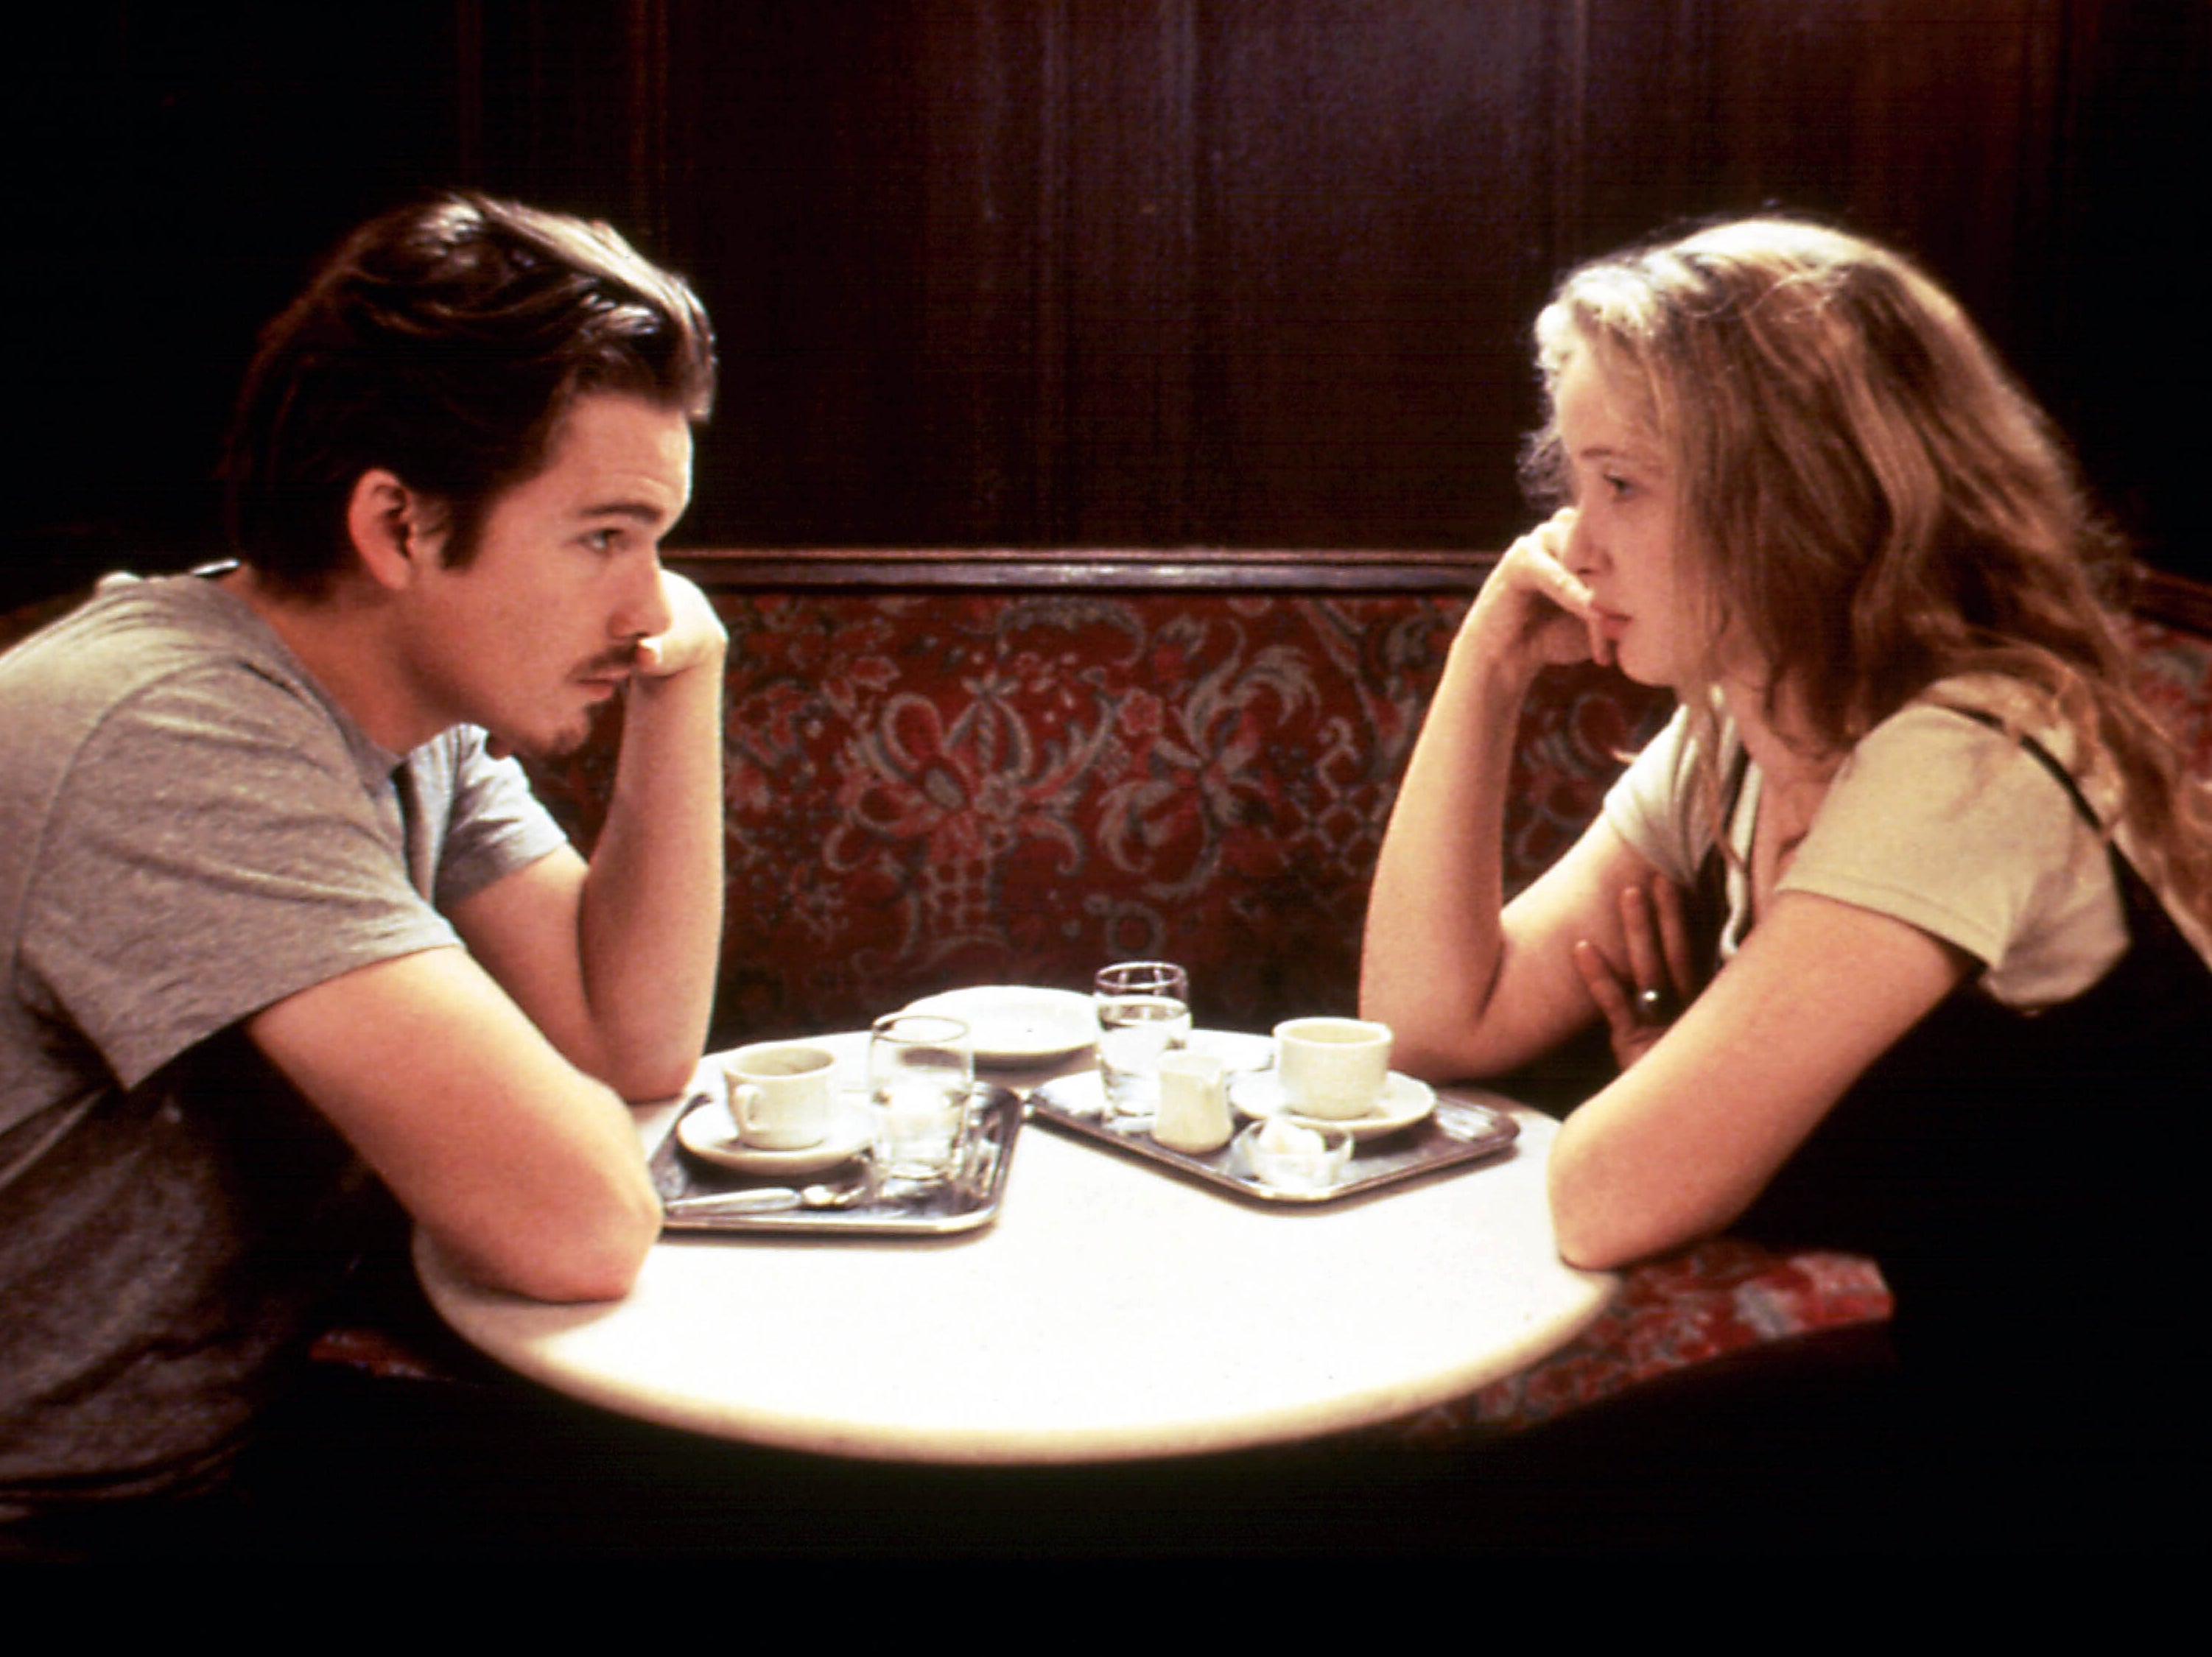 Ethan Hawke and Julie Delpy in ‘Before Sunrise’